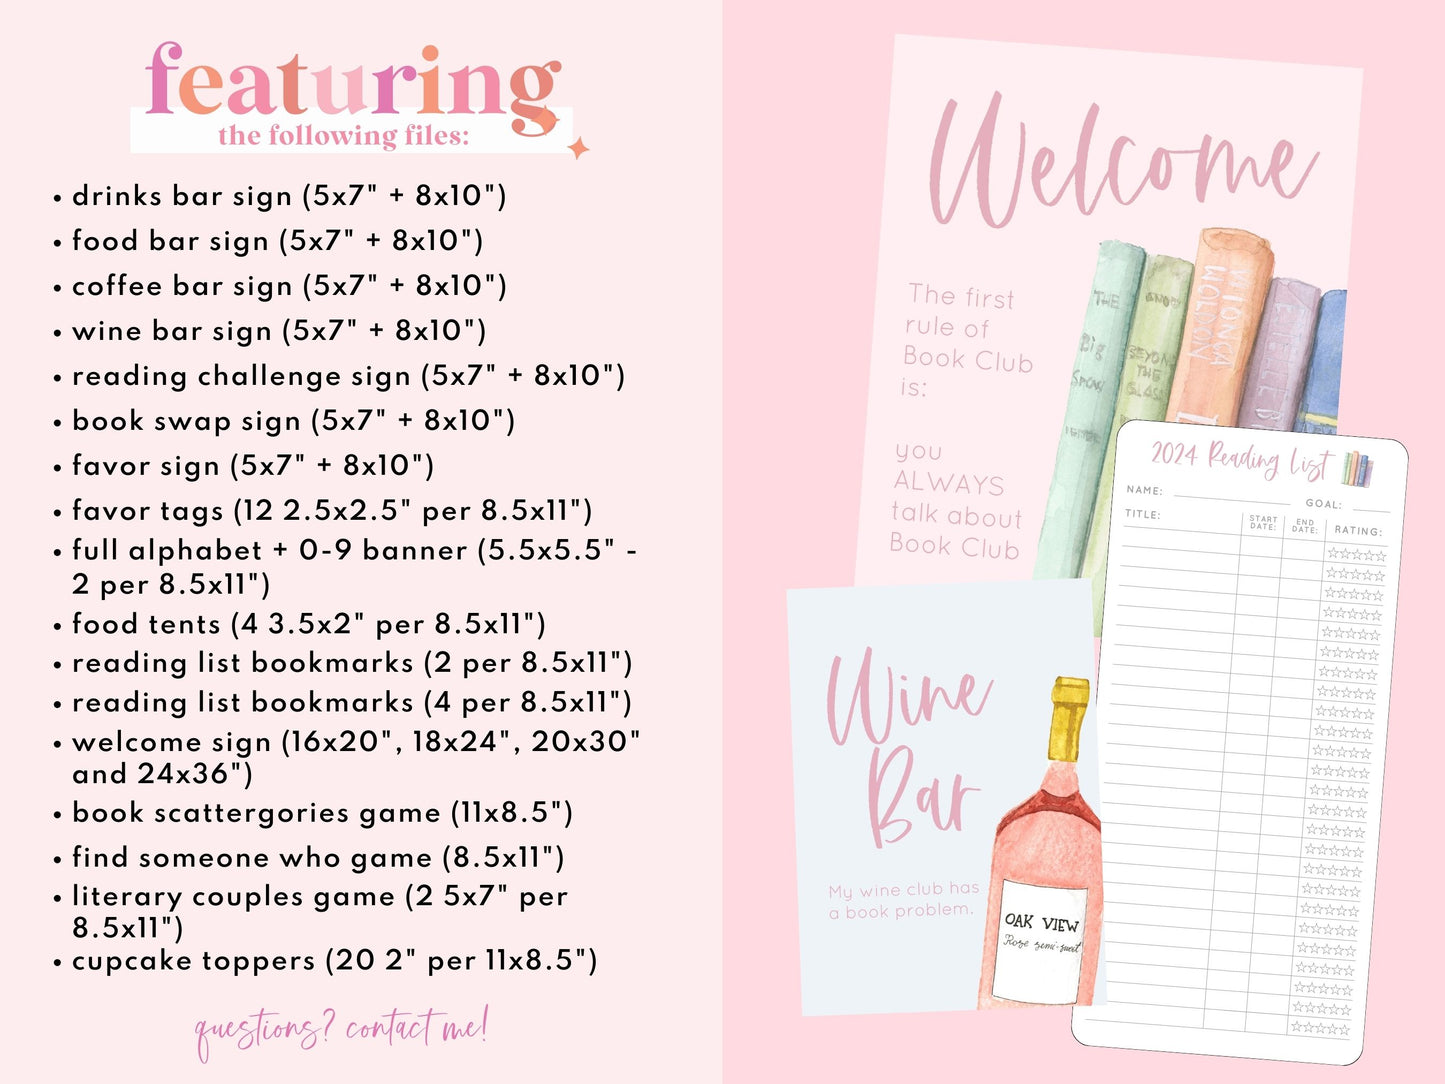 Book Club Party Printable Package